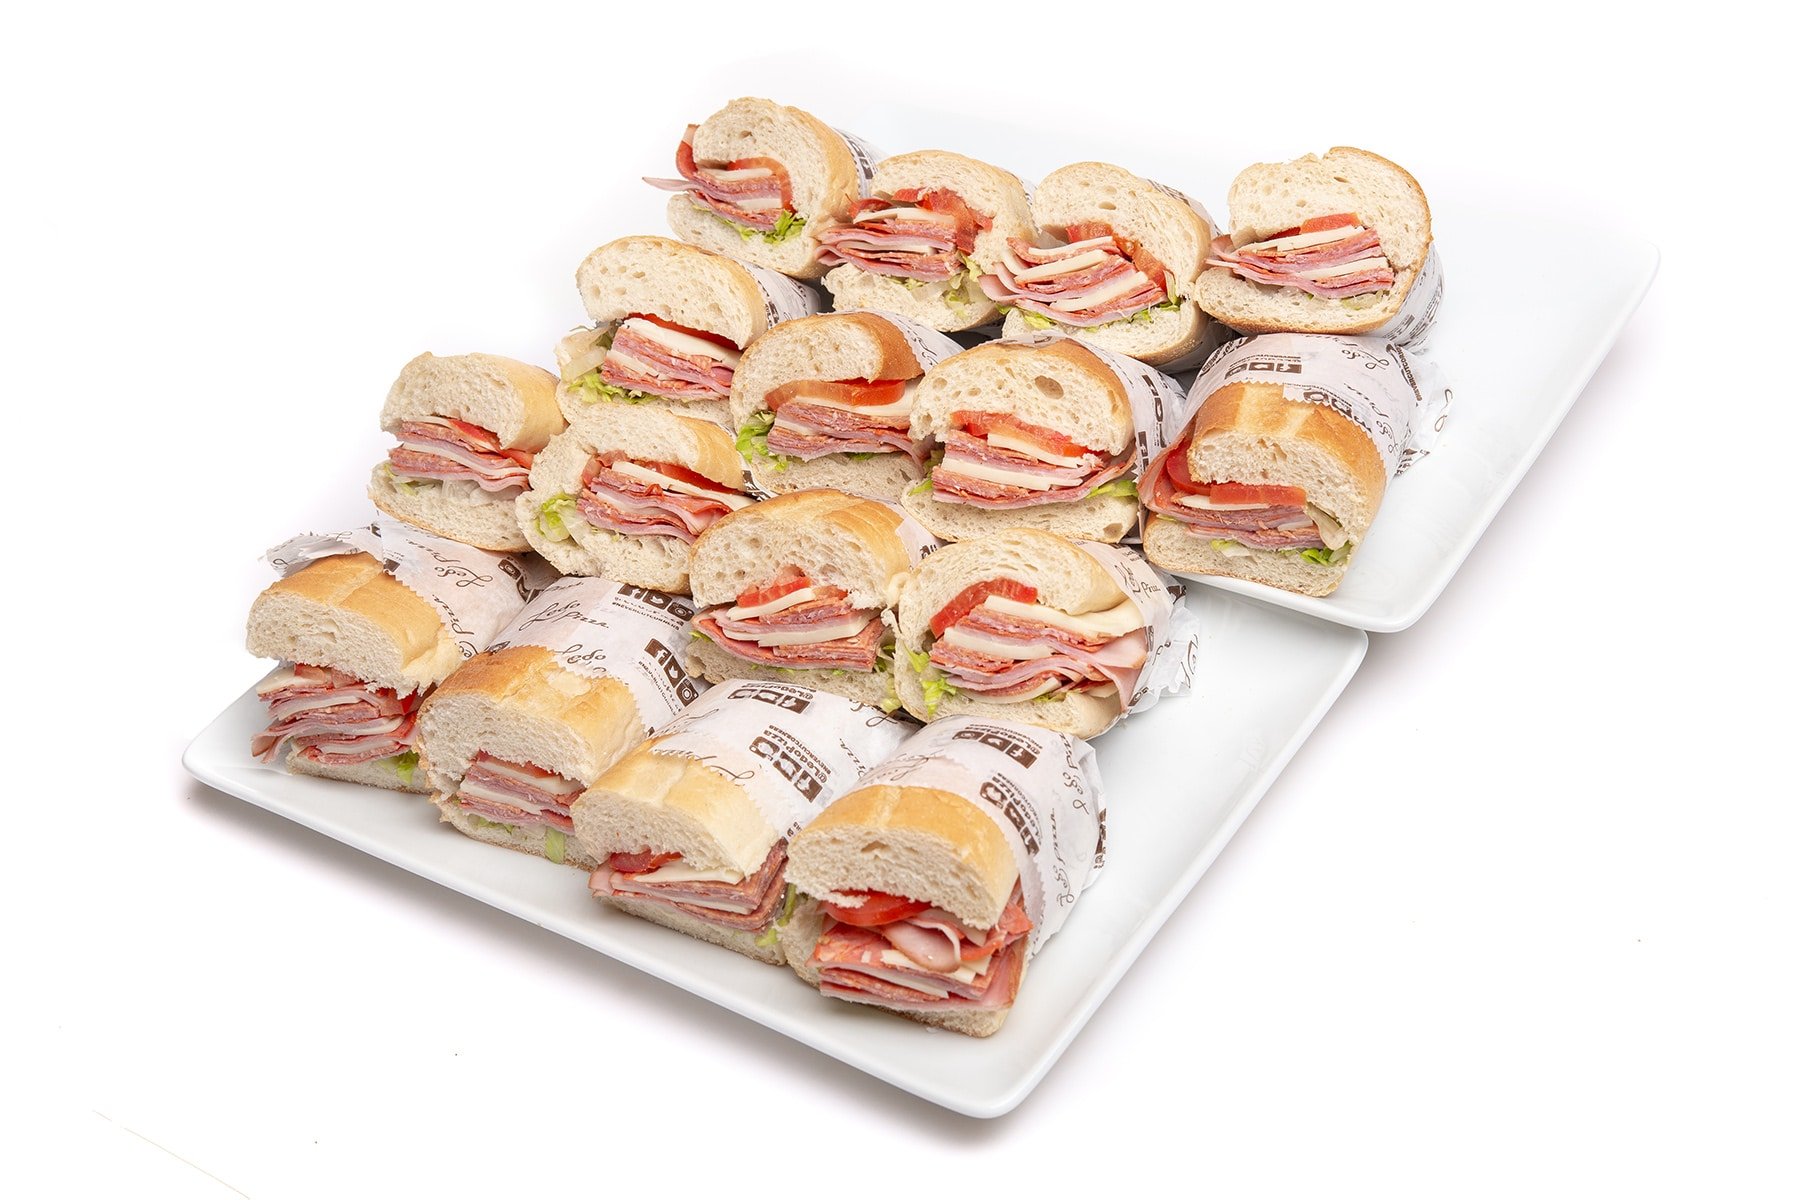 Catering Sub Platters